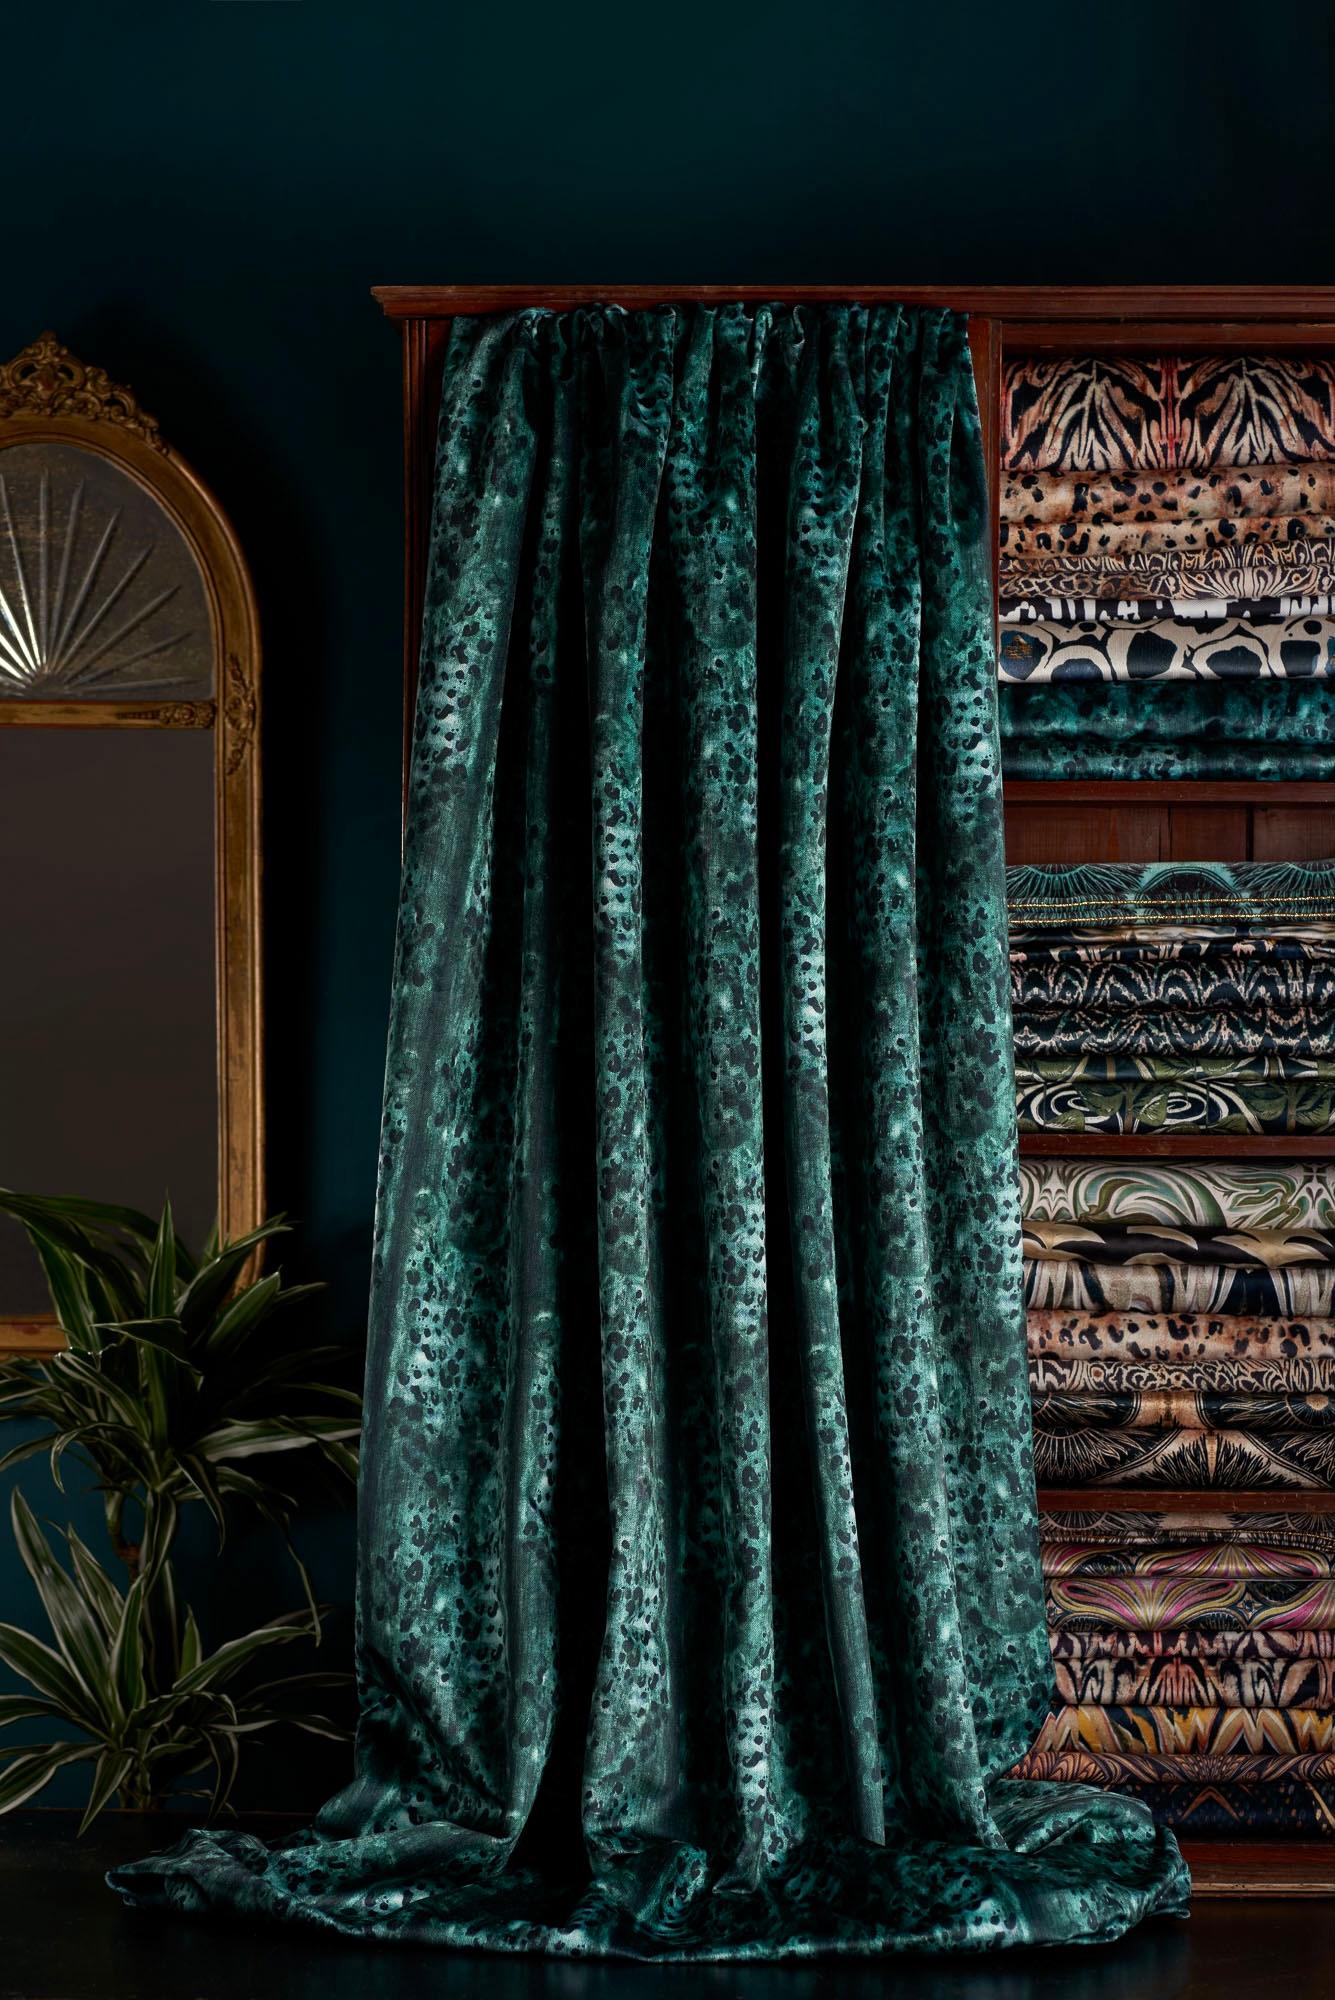 A beautiful animal-inspired print hand painted by Anna Hayman. With an artsy, linear feel this velvet has the power of animal print coupled with a softer painterly aspect. Reimagined in shades of teal and black, this is a beautiful deep green blue